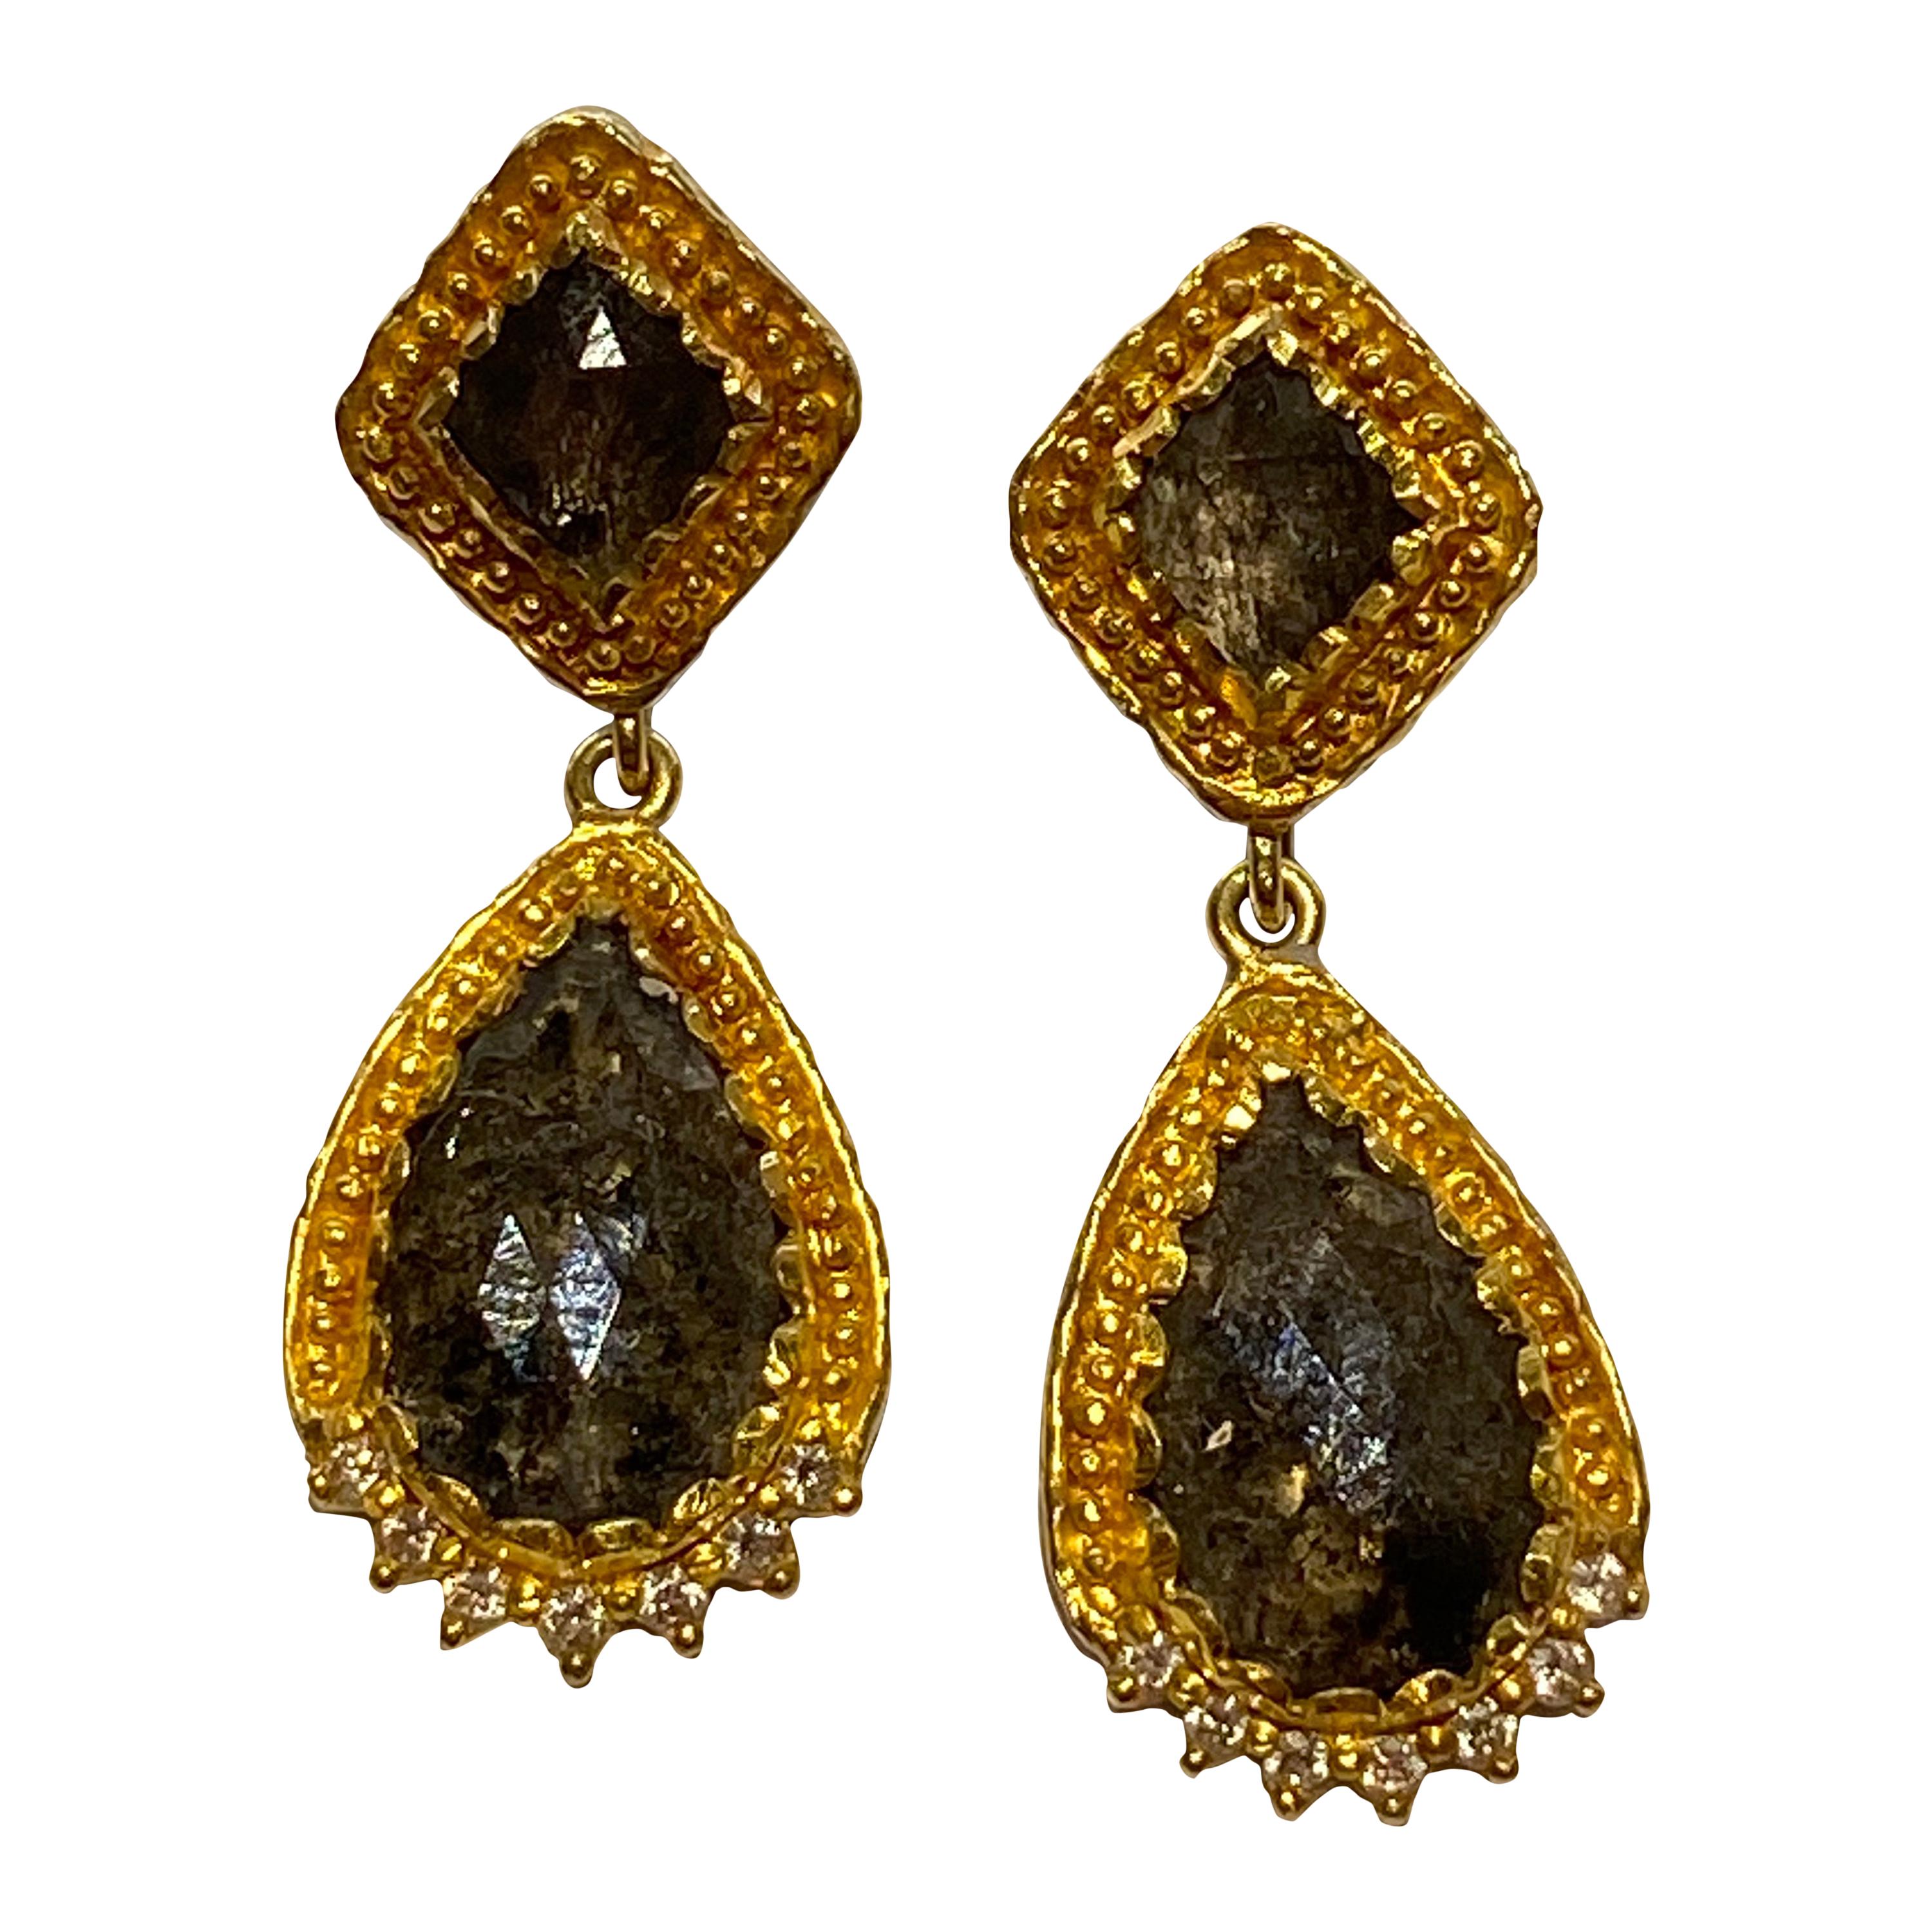 Inspired by the energy pulsating throughout nature, Velyan unites pure metals and gemstones into stunning styles that display the grandeur of fine jewelry.

These earrings feature rustic diamonds teardrops set in 24k yellow gold with pave white